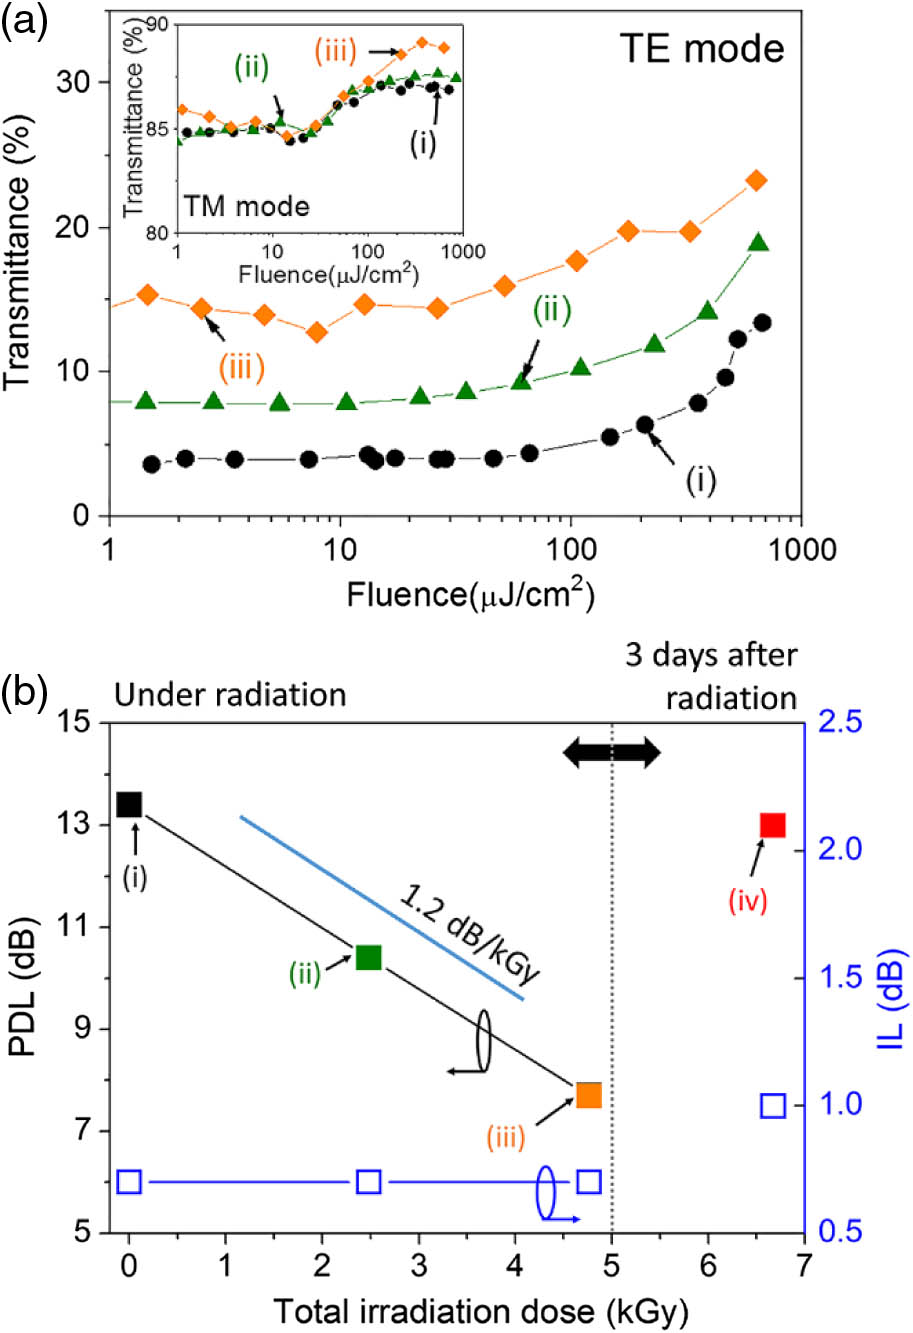 (a) NLT of the graphene SA measured by the femtosecond pulses in TE mode (inset: NLT in TM mode). (b) PDL and IL of the graphene SA as a function of irradiation dose measured by the CW light. (i) 0 kGy, (ii) 2.5 kGy, (iii) 4.8 kGy, and (iv) 6.7 kGy at 98 Gy/hr average dose rate. Note that the 6.7 kGy-irradiated sample (iv) was measured three days after radiation (without any special treatment), showing the recovery property in PDL.